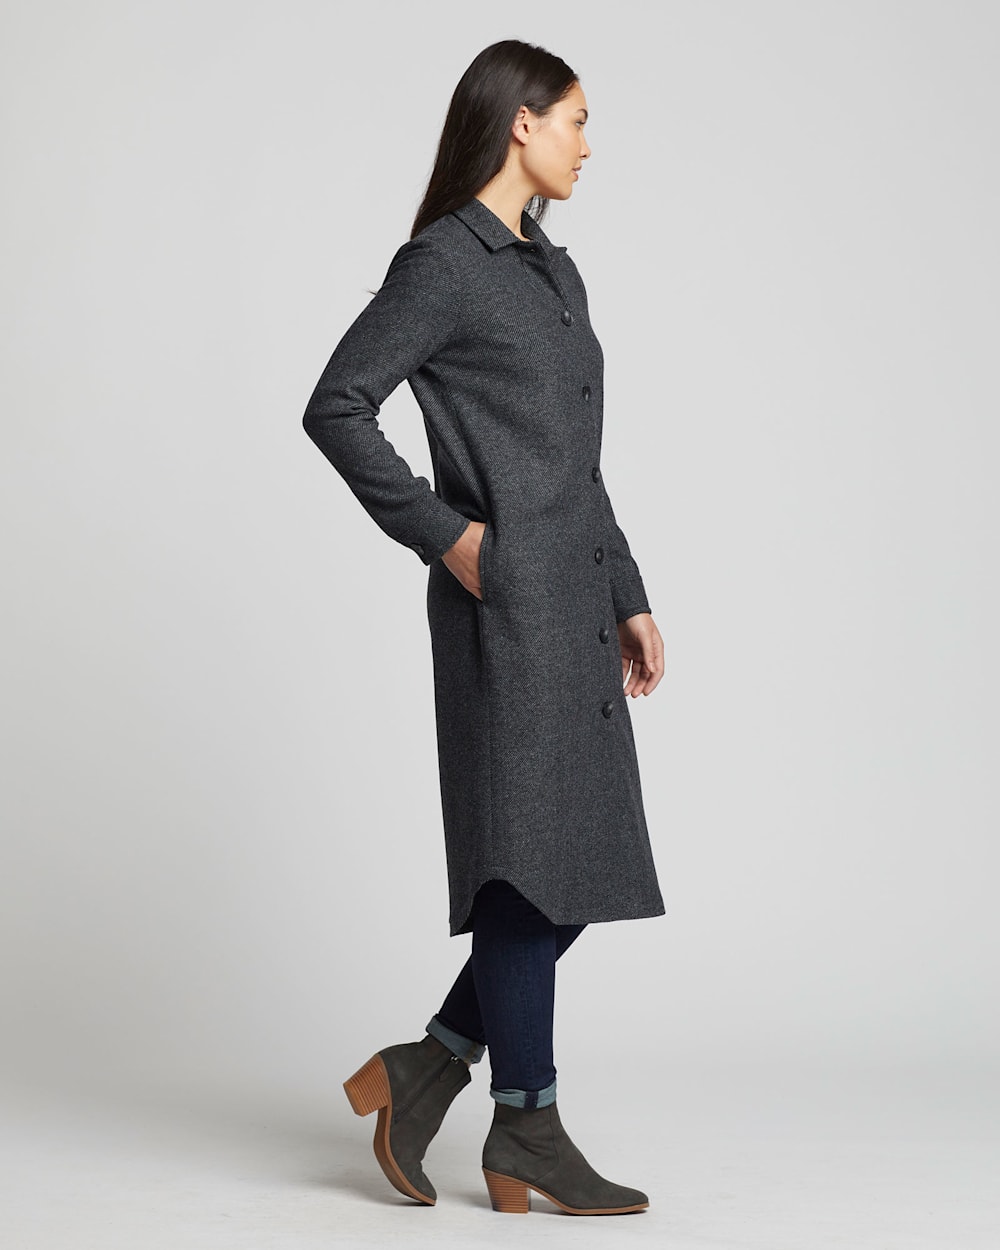 ALTERNATE VIEW OF WOMEN'S WOOL TWILL DUSTER SHIRT IN GREY MIX/BLACK image number 2